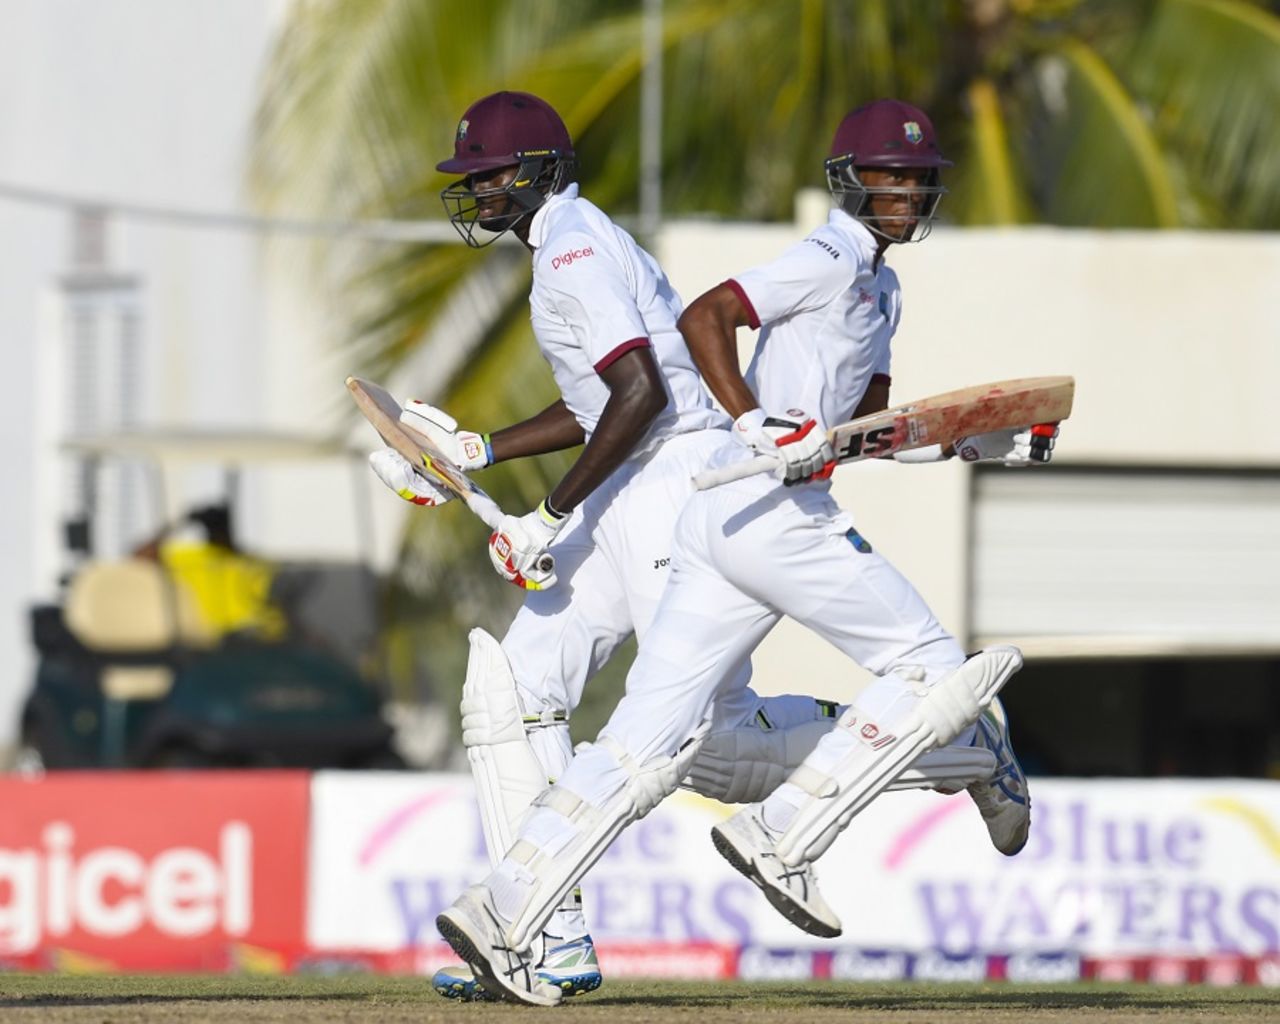 Jason Holder and Roston Chase turned the tables on Pakistan, West Indies v Pakistan, 2nd Test, Bridgetown,1st day, April 30, 2017